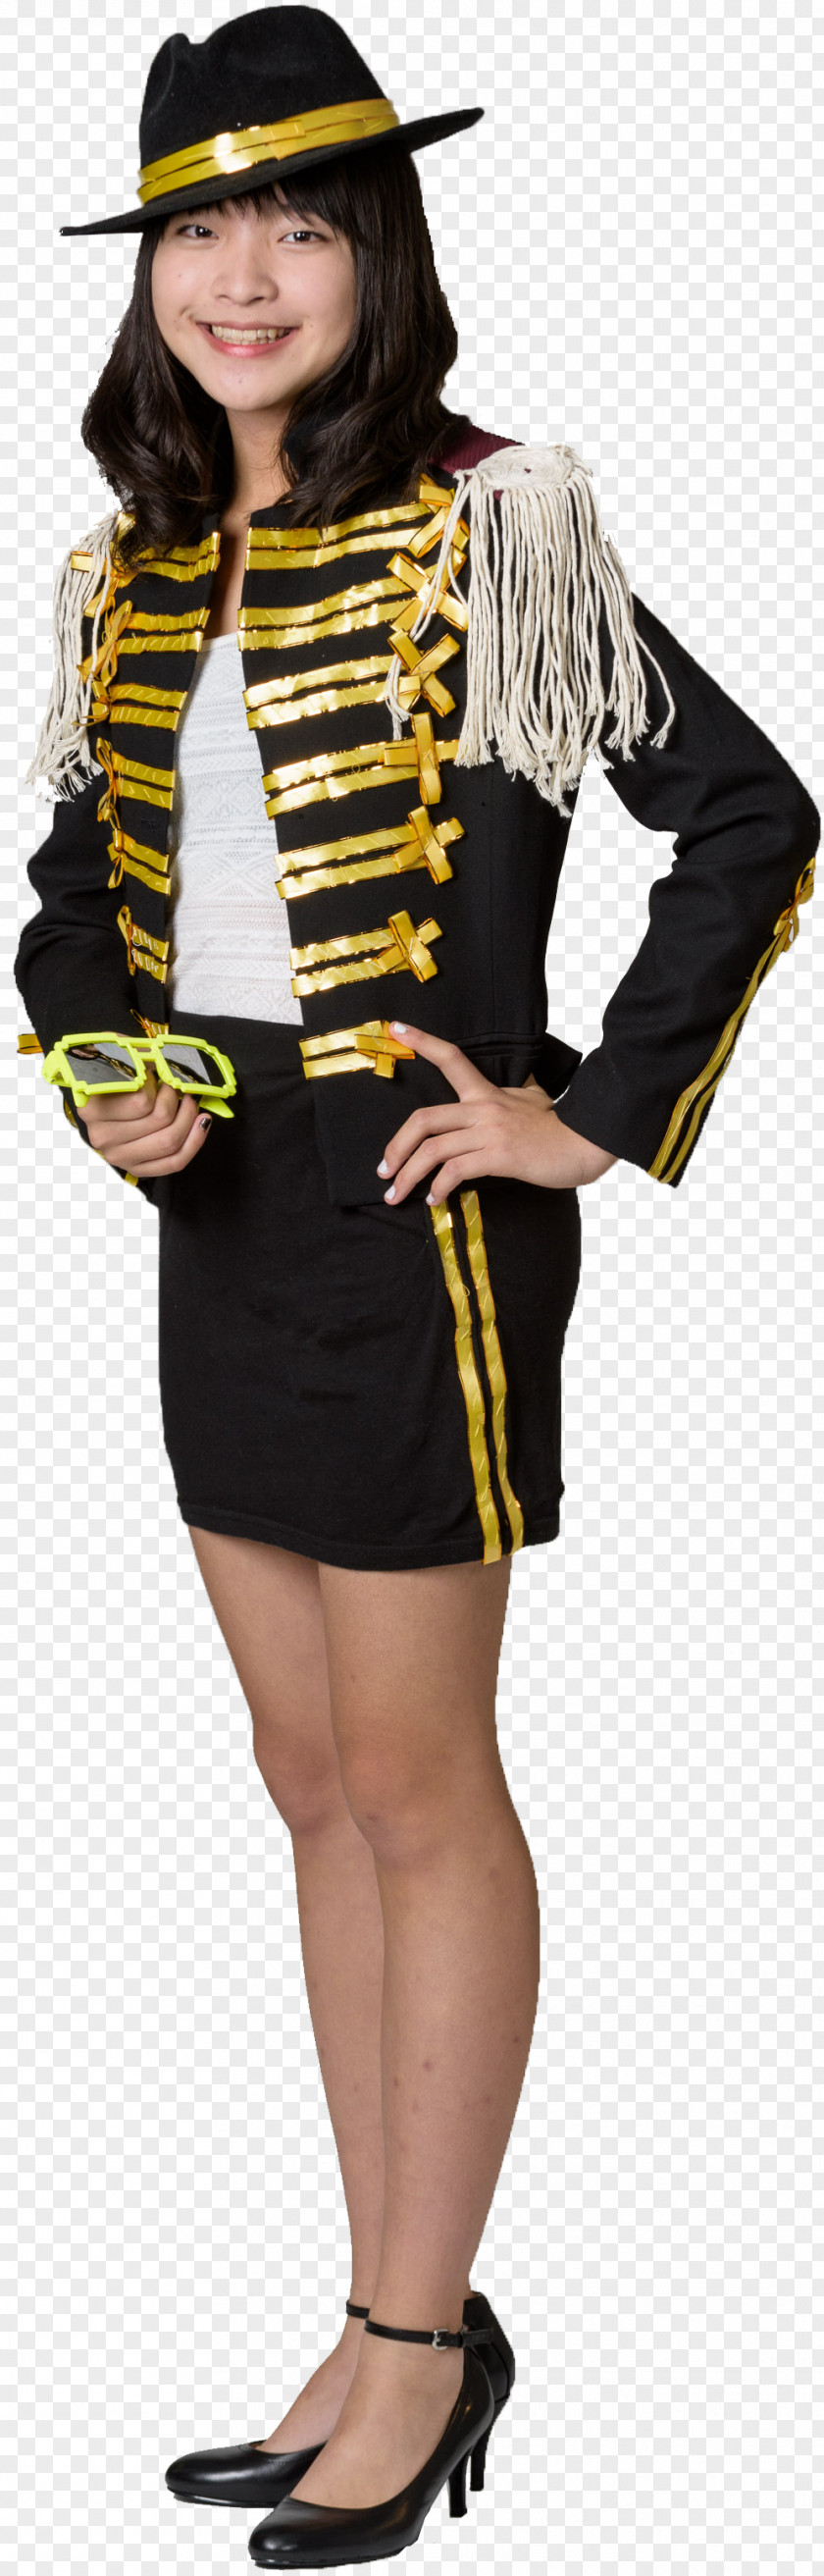 The Feature Of Northern Barbecue Fashion Show Model Costume PNG